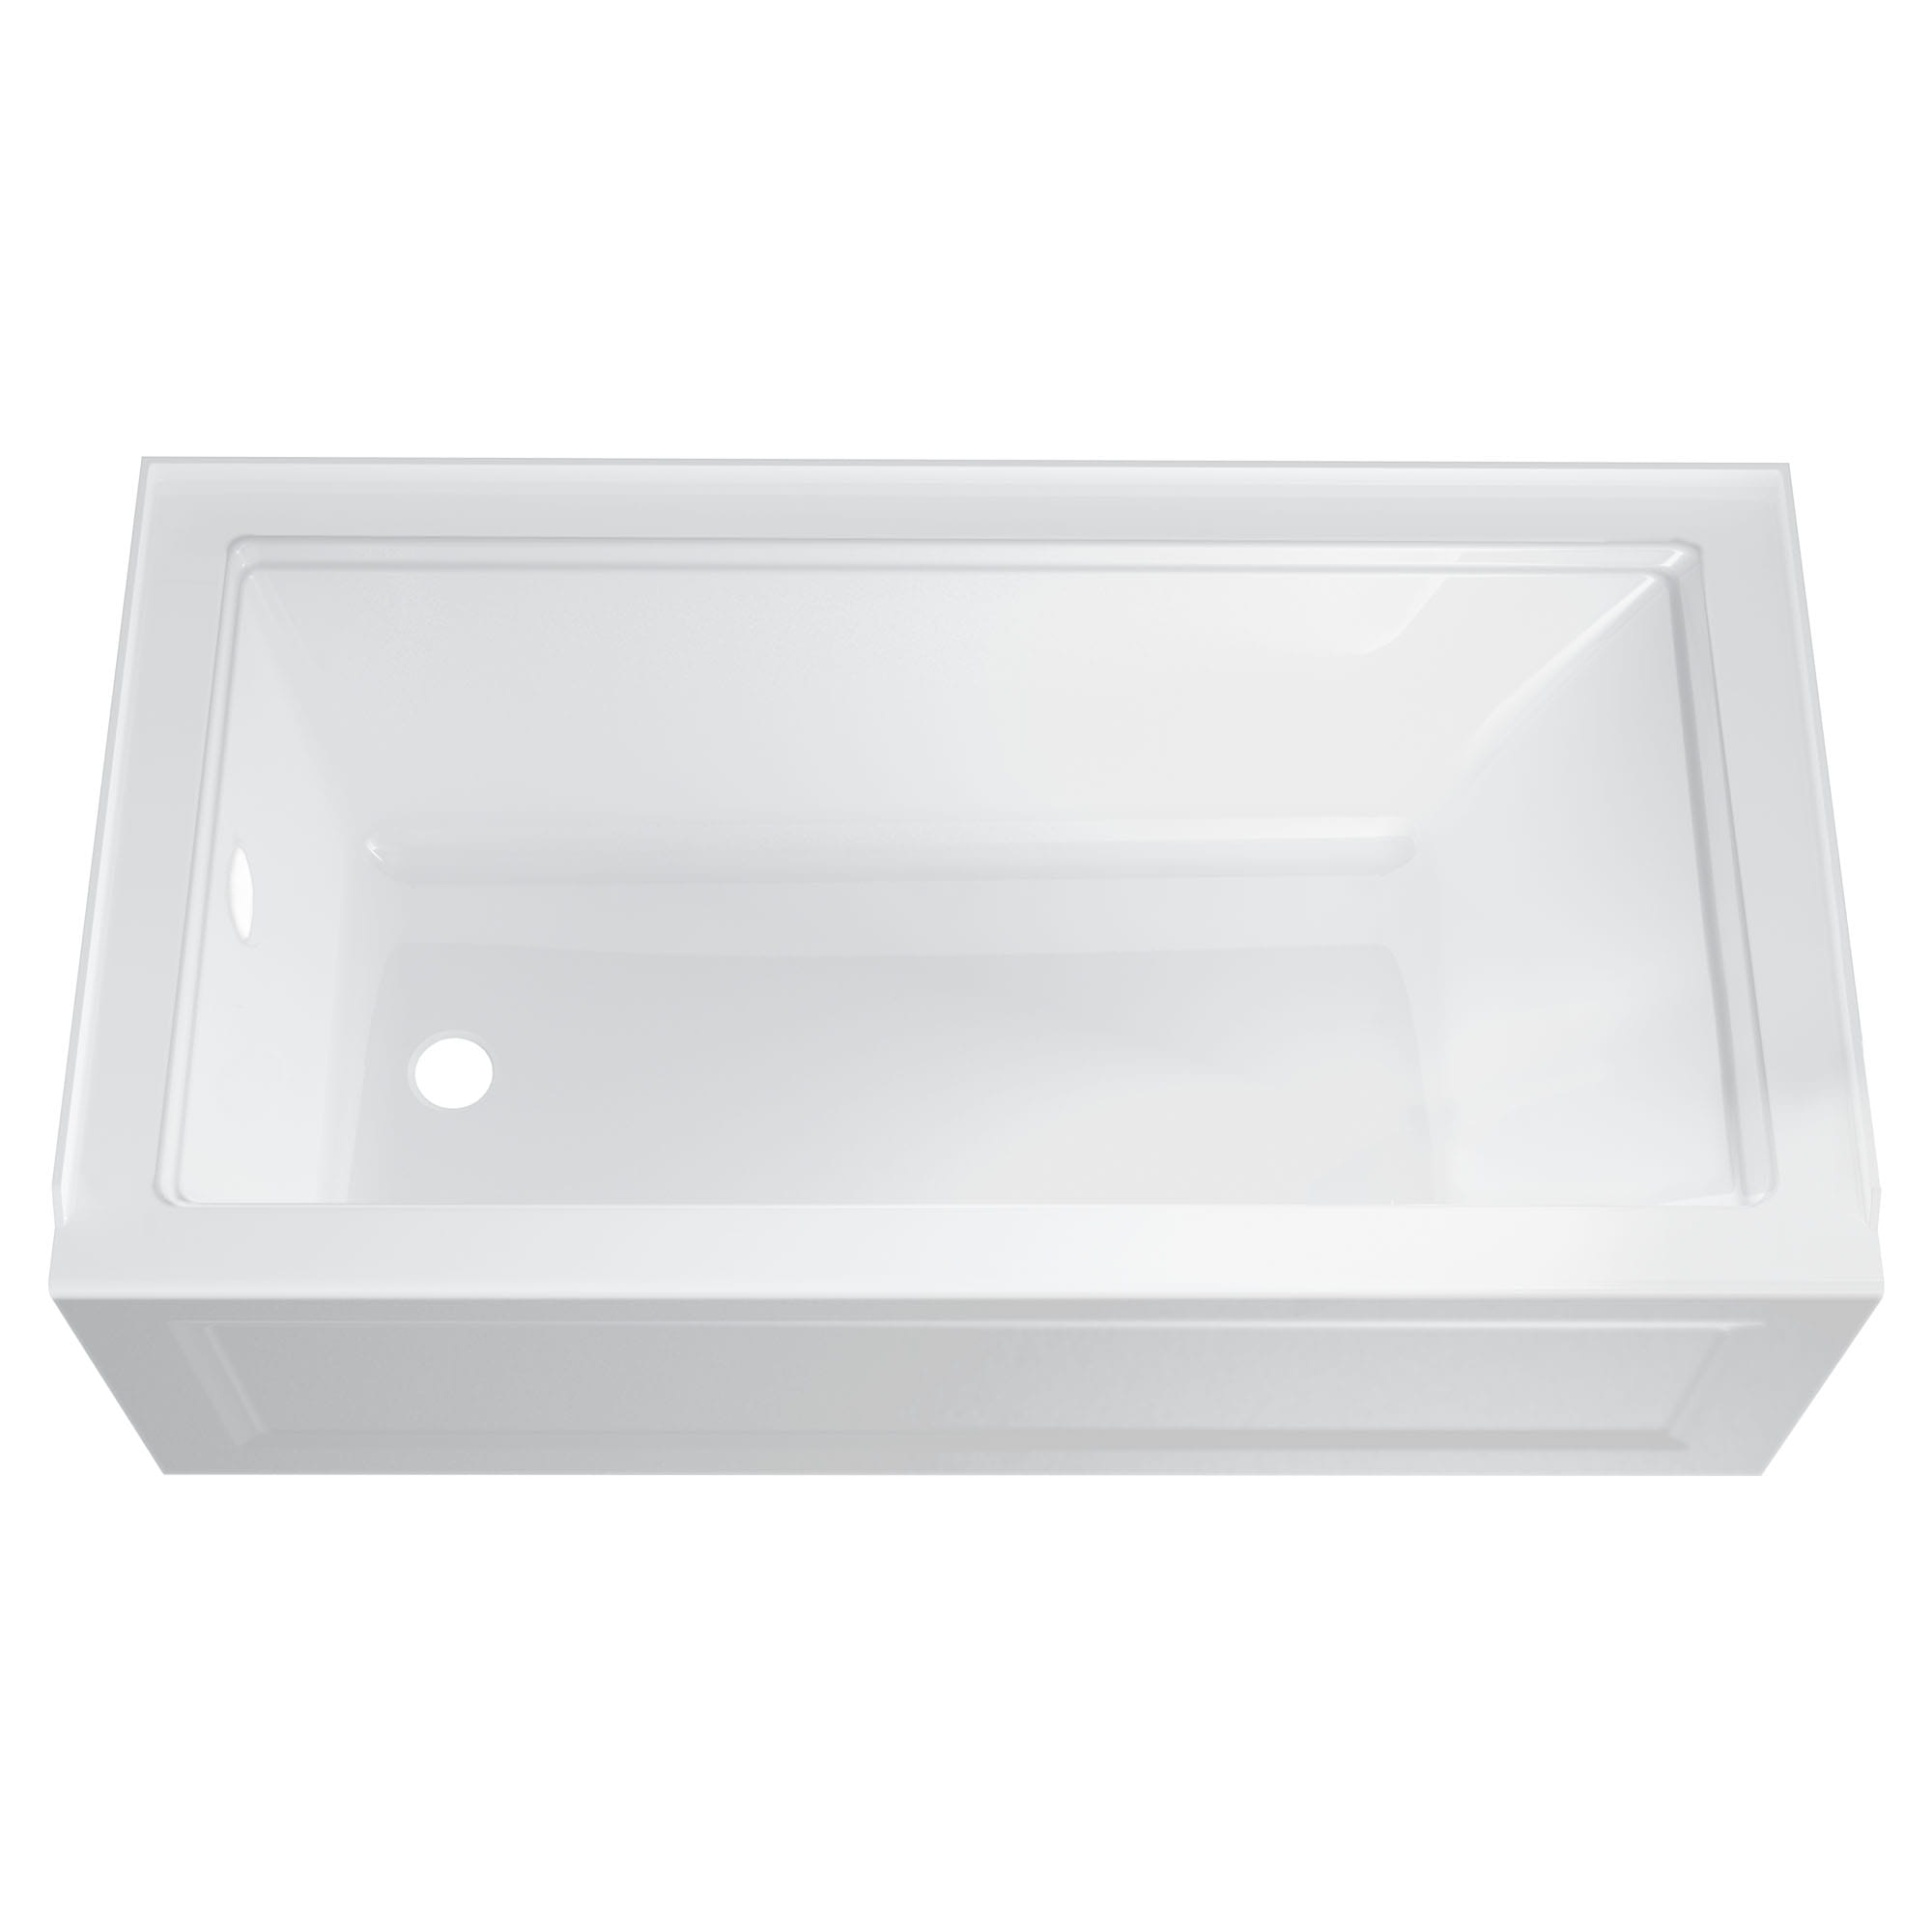 Town Square® S 60 x 32-Inch Integral Apron Bathtub With Left-Hand Outlet